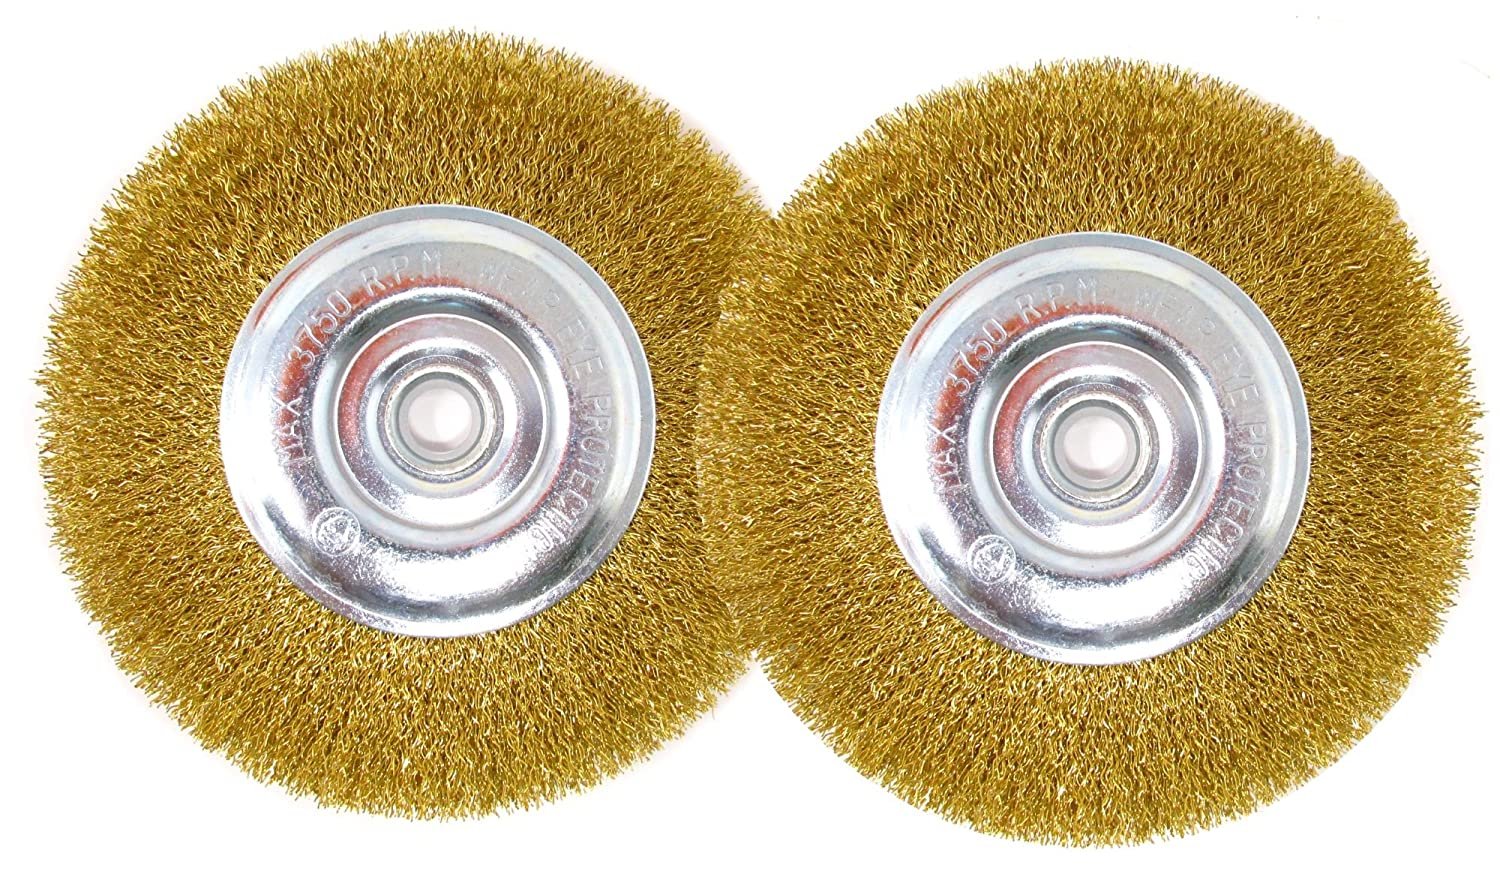 6-Inch Wire Wheel Brush Set for Bench Grinder, Brass Coated, Pack